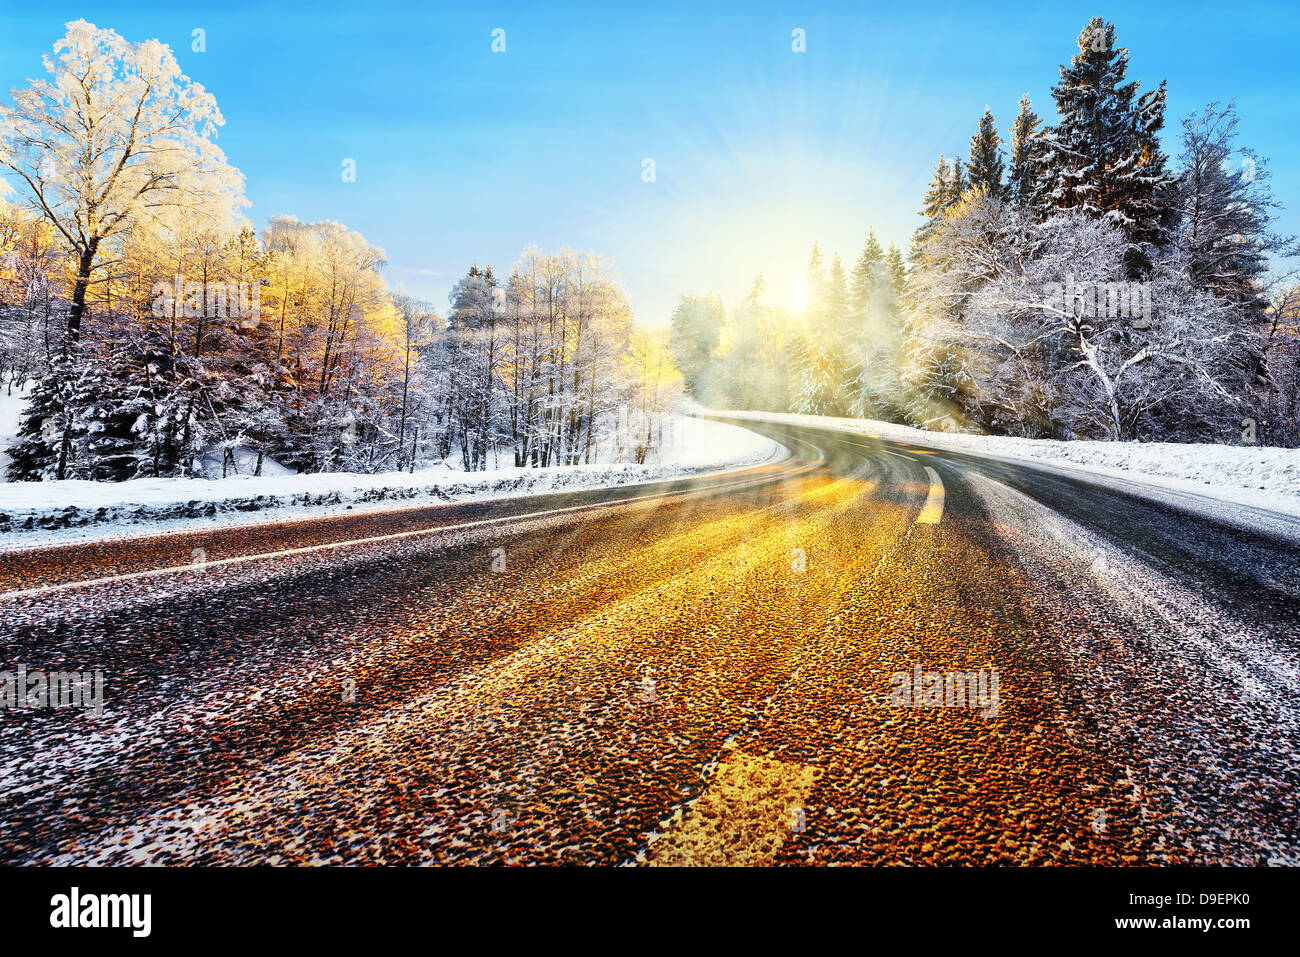 Winter road in winter with sunlight reflecting on asphalt Stock Photo